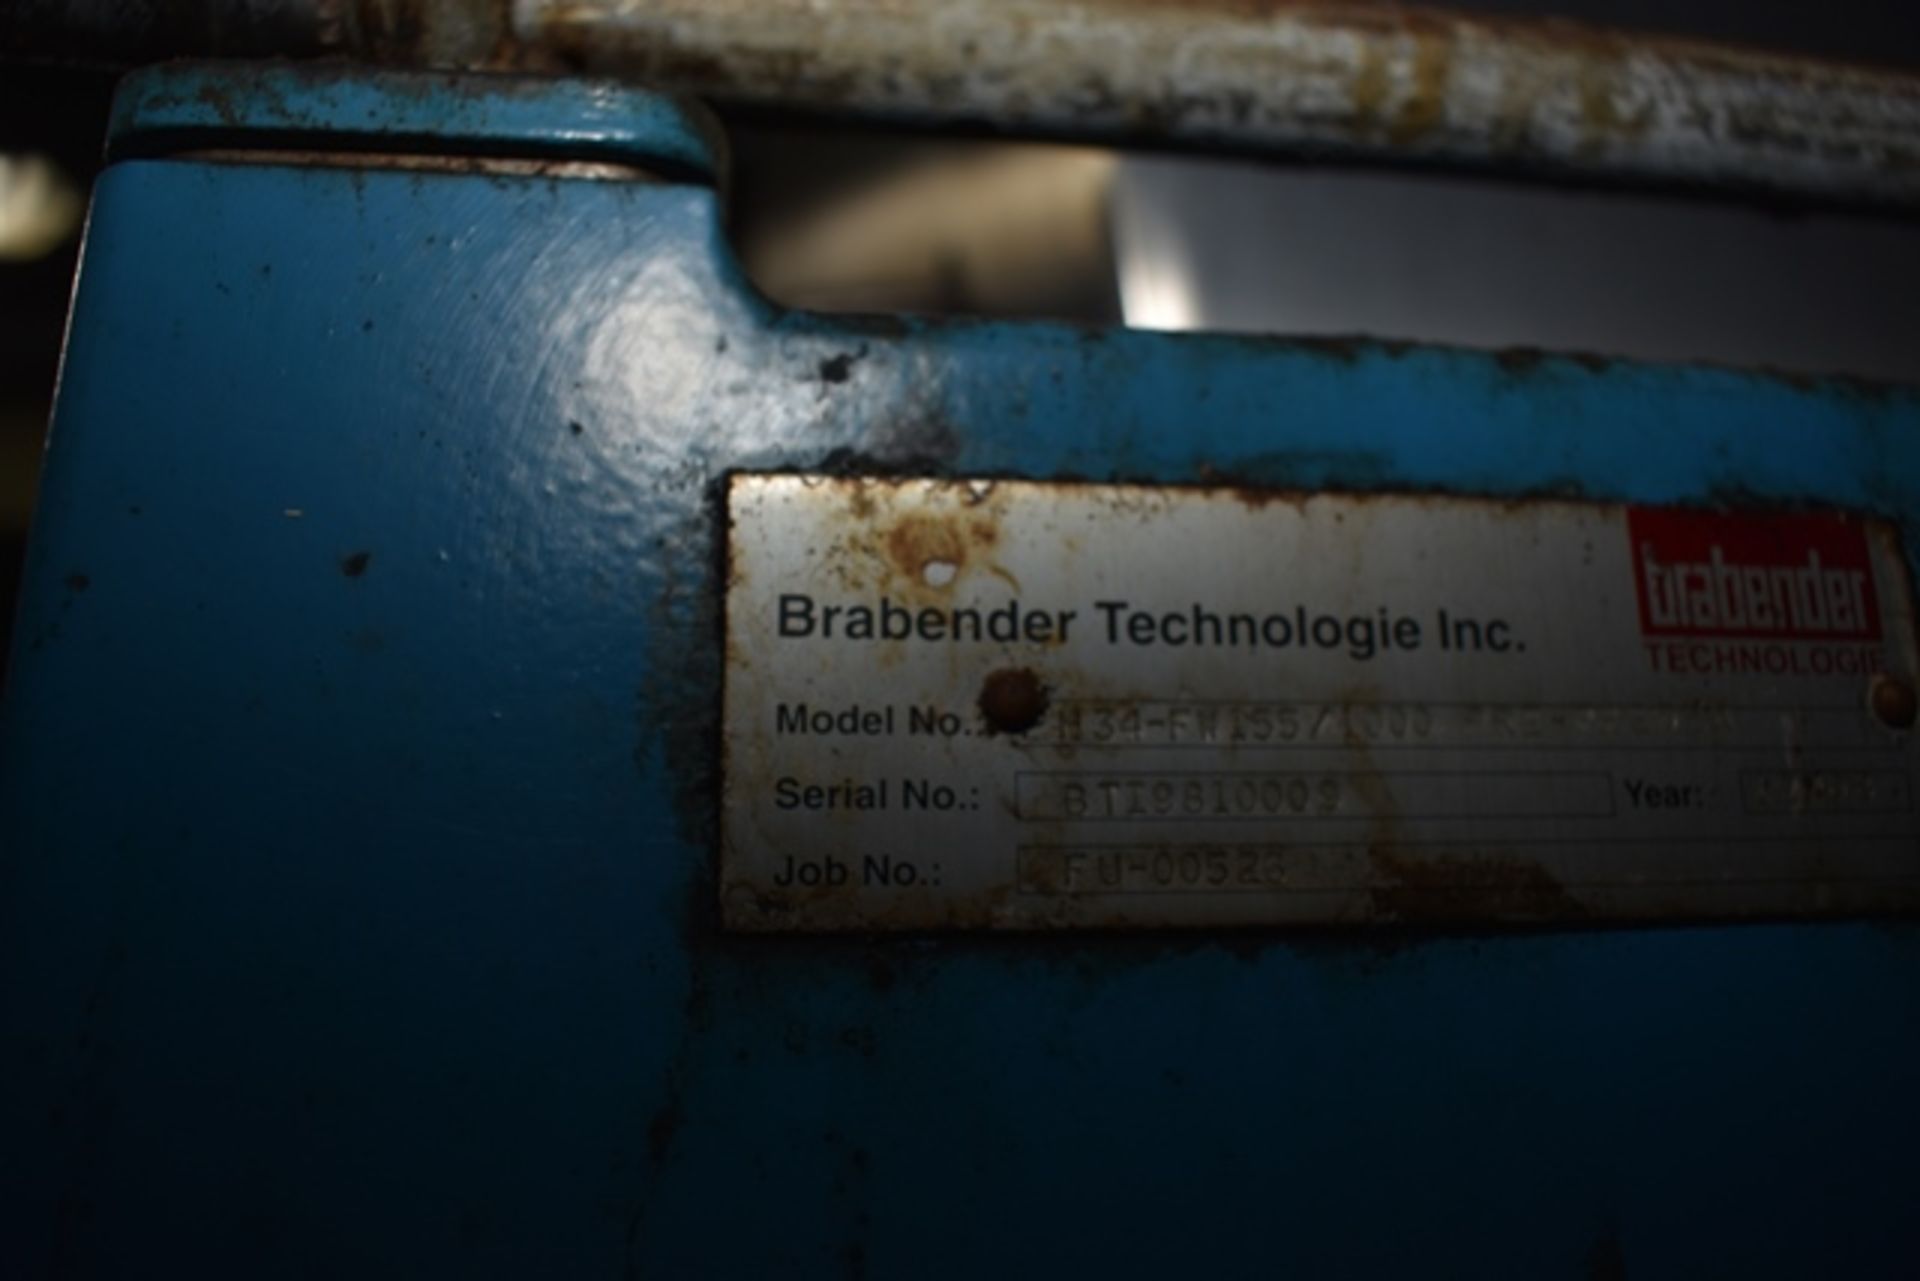 Brabender Tech pre feeder, model H34-FW155/1000, s/n BTI9810009, loss in weight pre feeder, with - Image 3 of 3